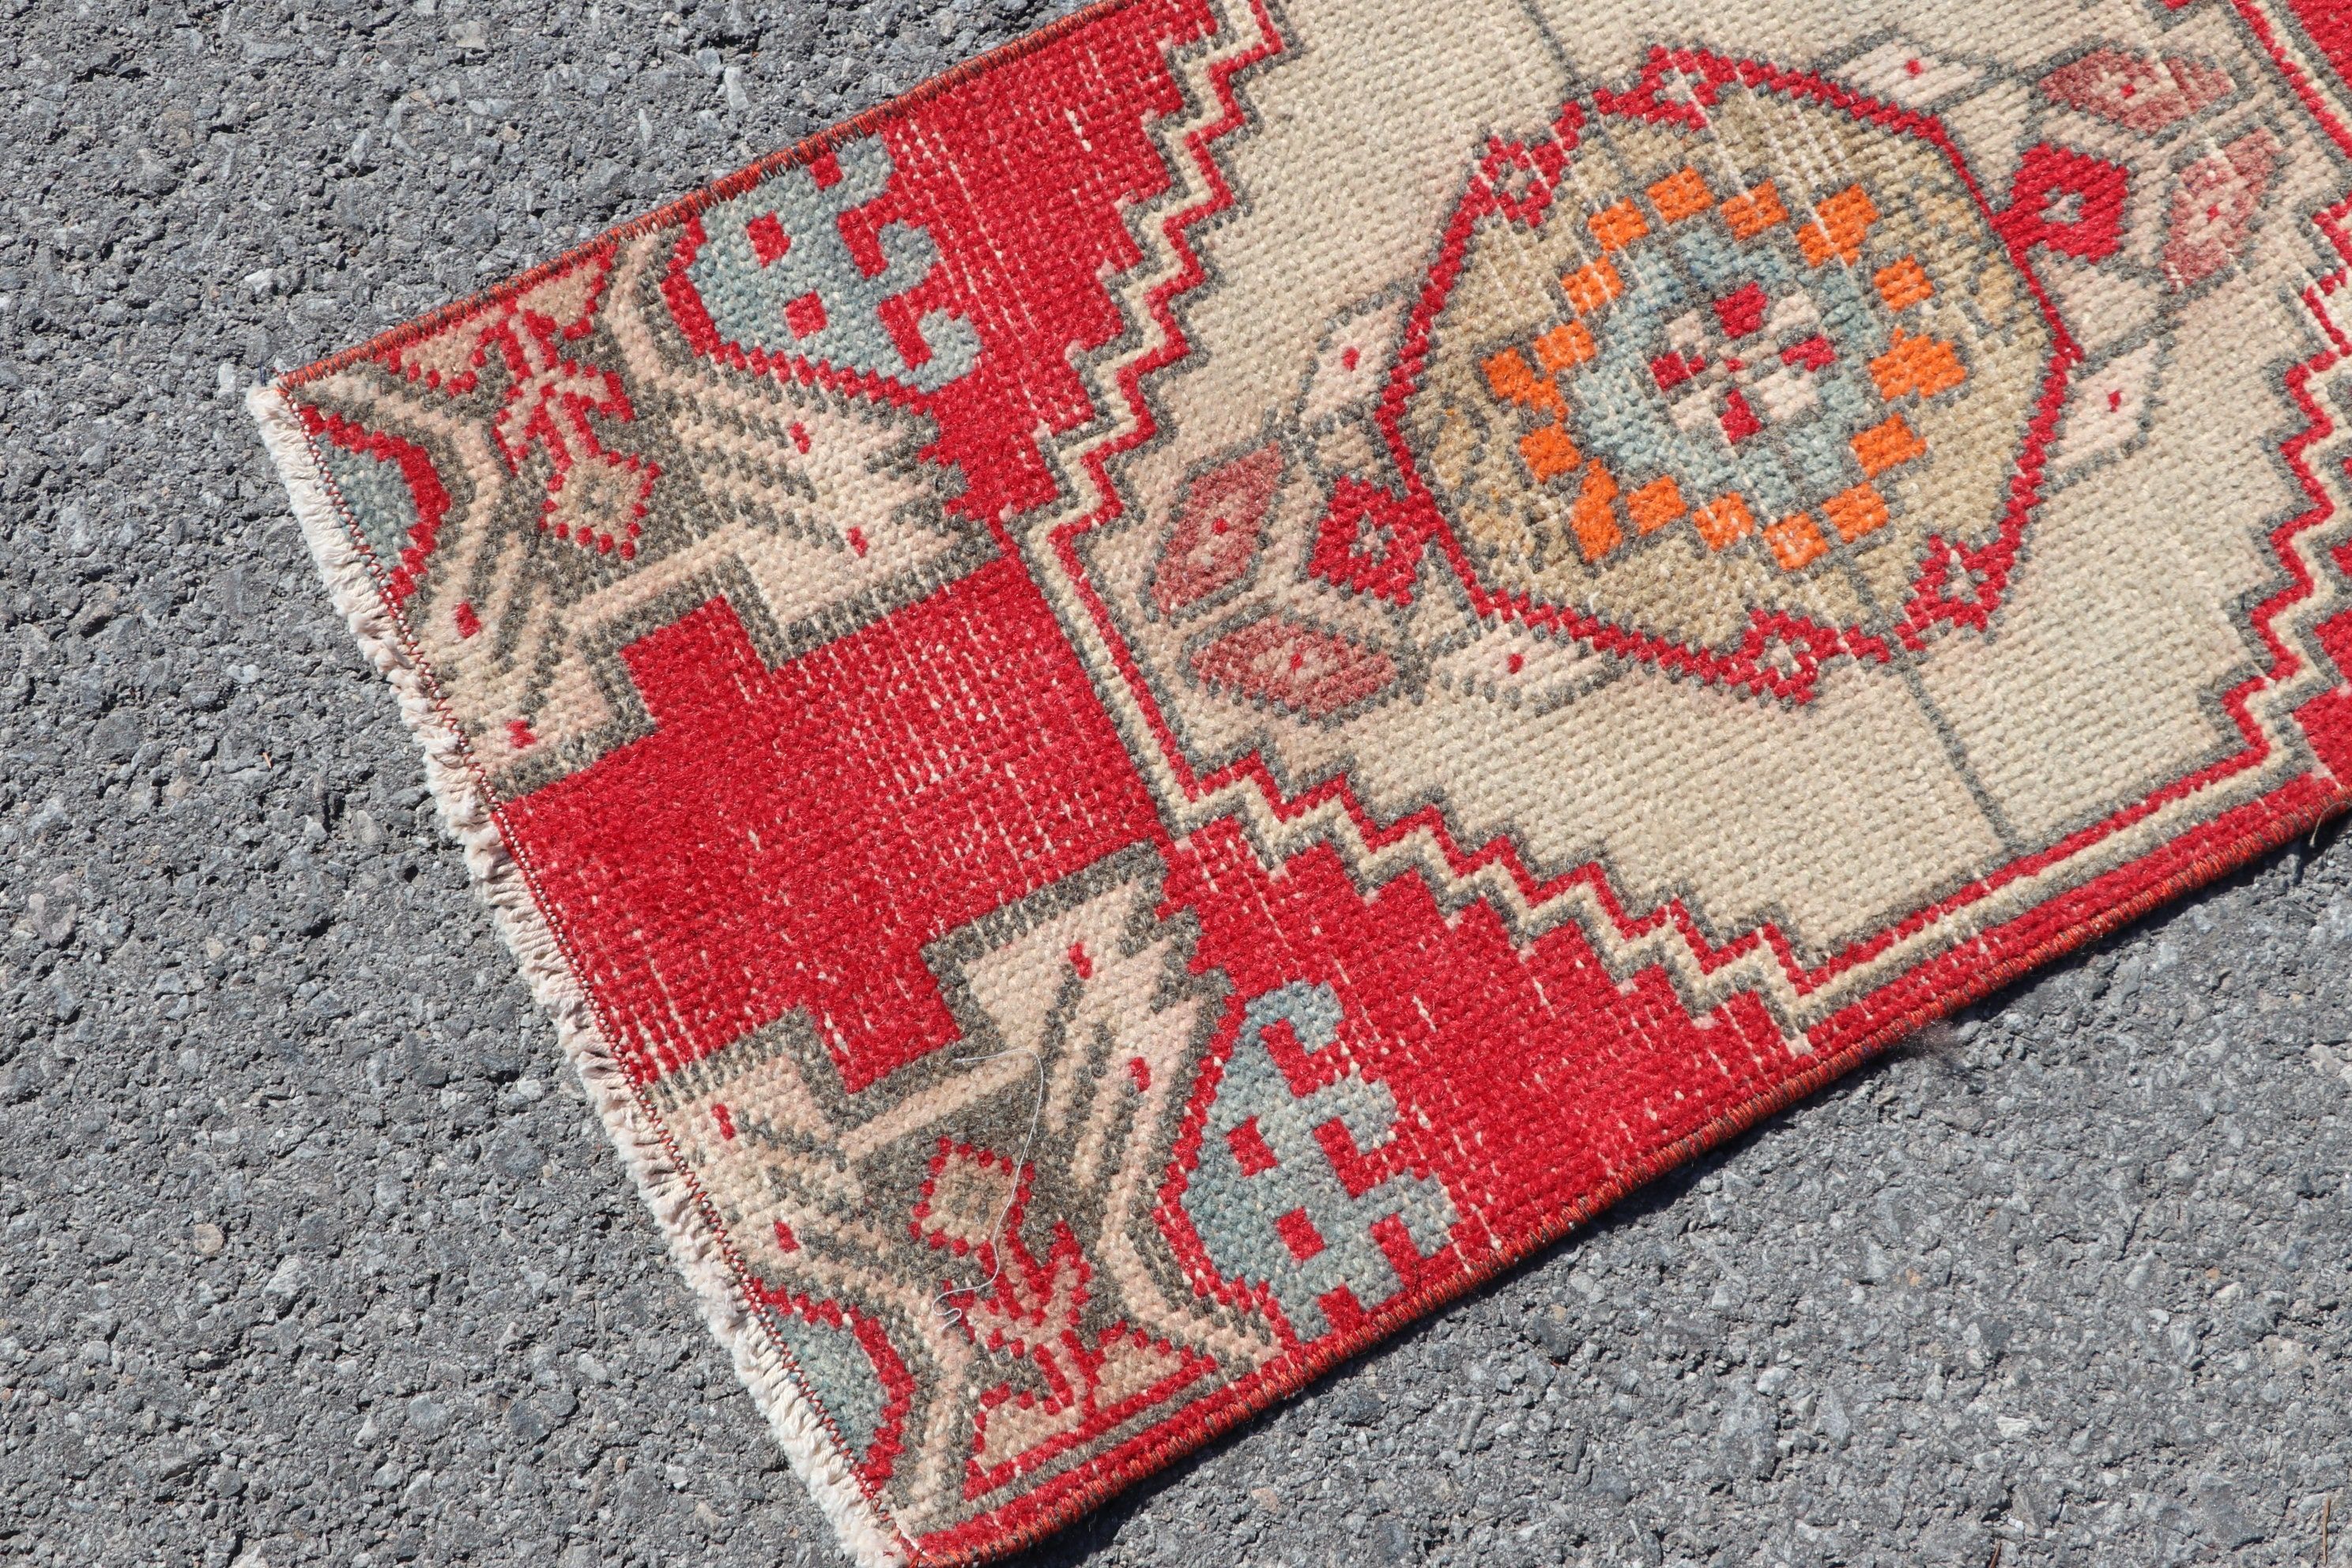 Antique Rug, Vintage Rug, Turkish Rugs, 1.3x2.7 ft Small Rugs, Bath Rug, Cool Rugs, Rugs for Bathroom, Entry Rug, Red Moroccan Rug